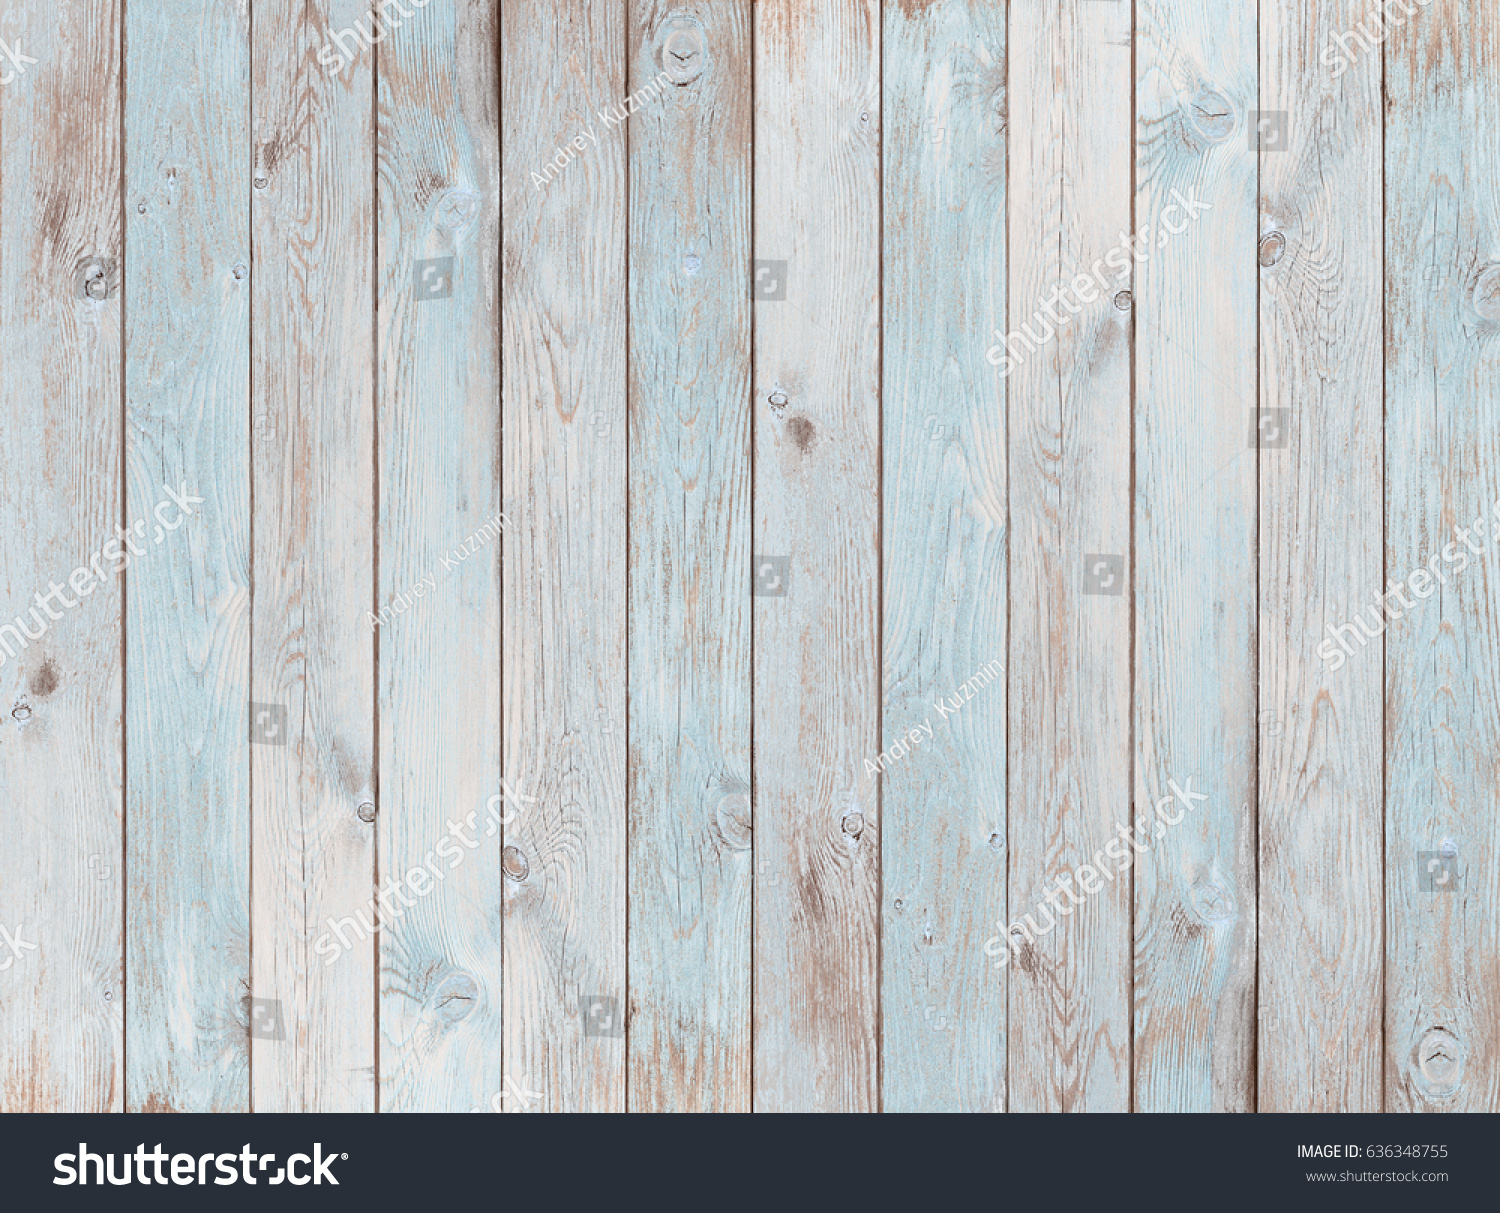 pale blue wood planks texture or background #636348755